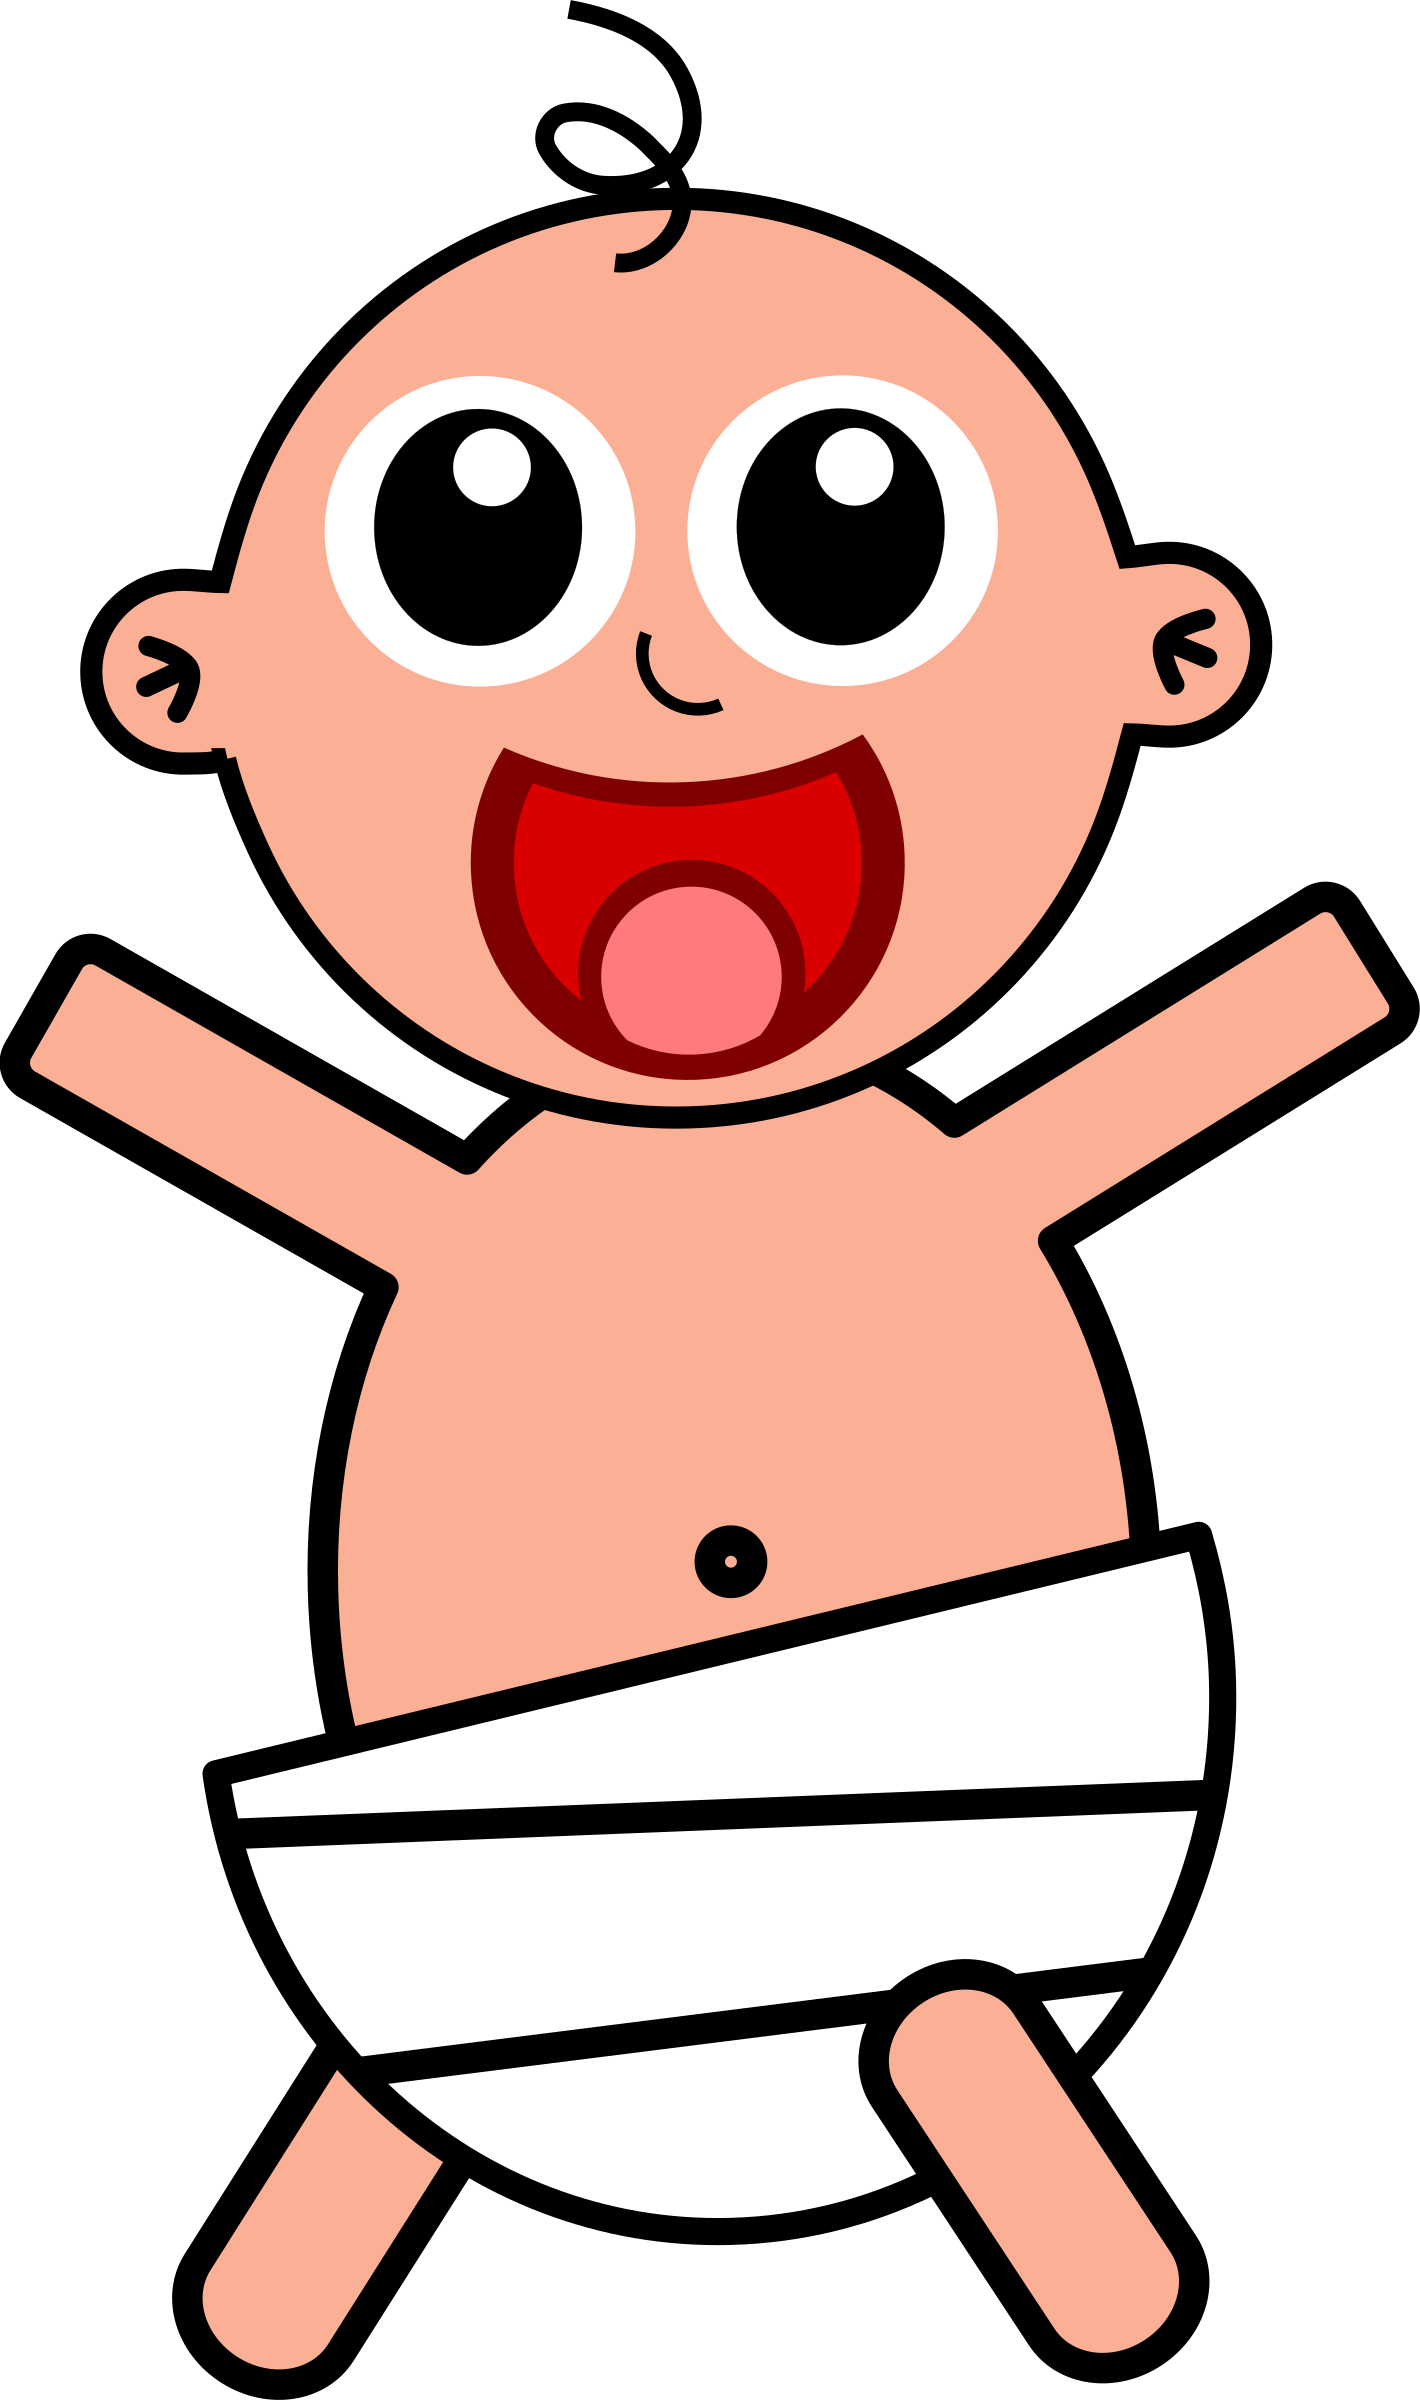 Baby clipart cute. Big image png